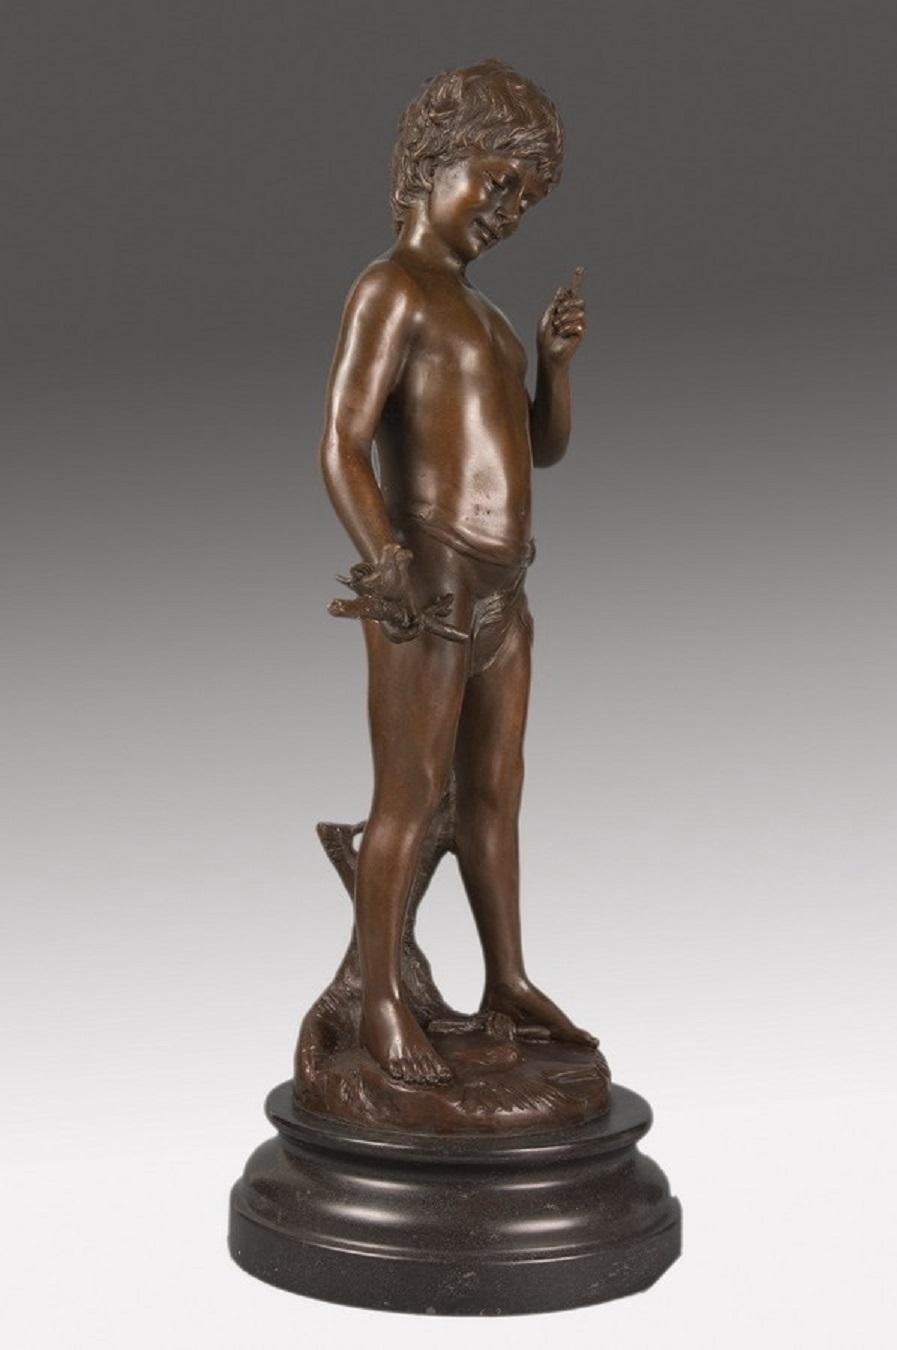 Bronze sculpture depicting the Art Nouveau naturalist effigy of a half-naked boy with a branch where two birds perch. Following models of A. MOREAU.
This denomination refers to the intention of creating a new art, carrying out a break with the